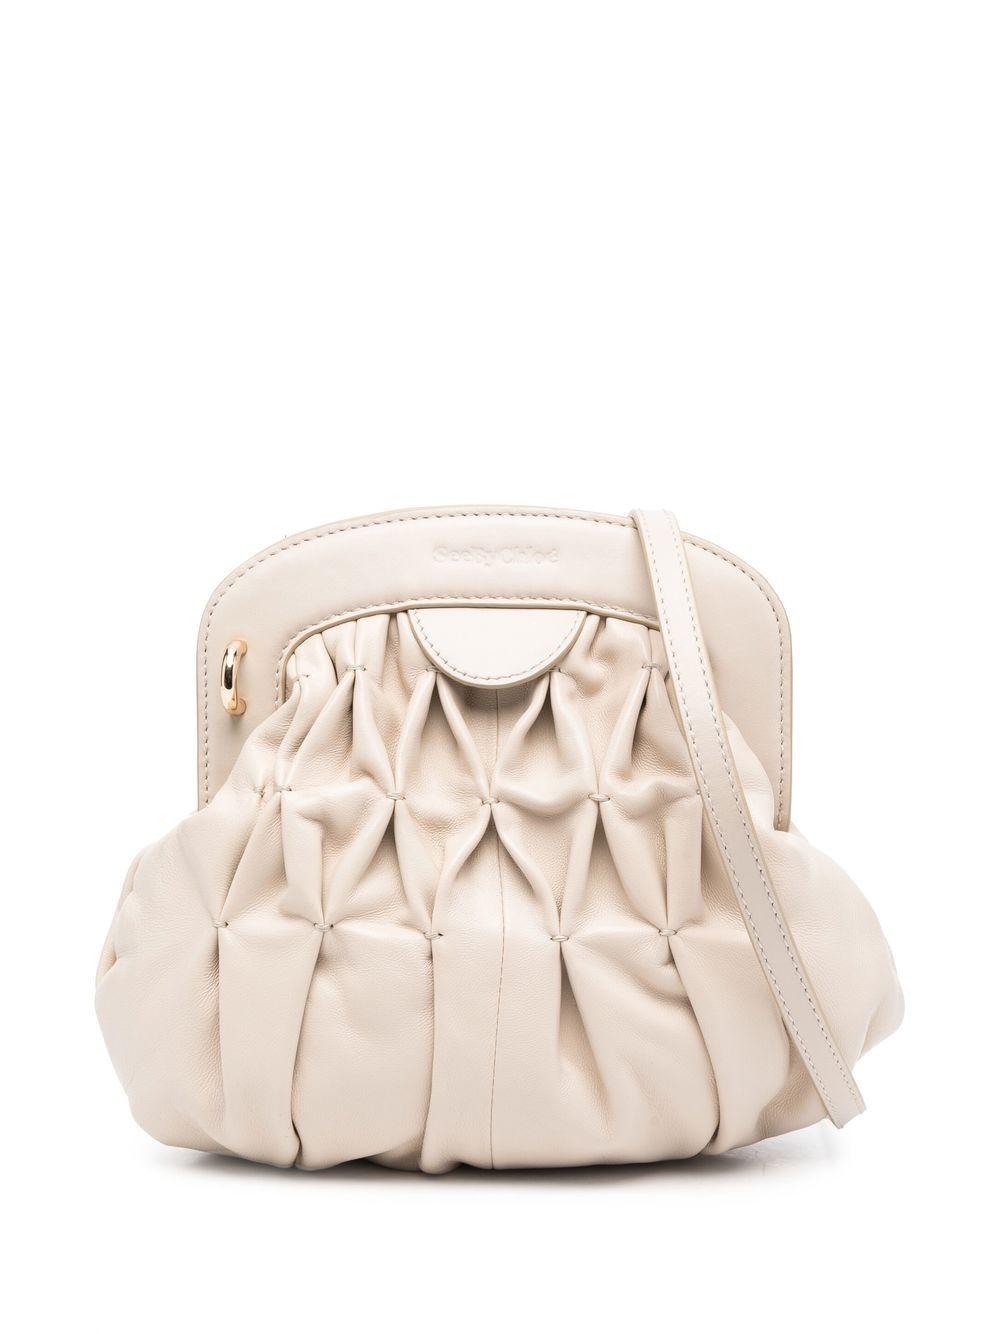 See By Chloé Piia Leather Crossbody Bag in Natural | Lyst